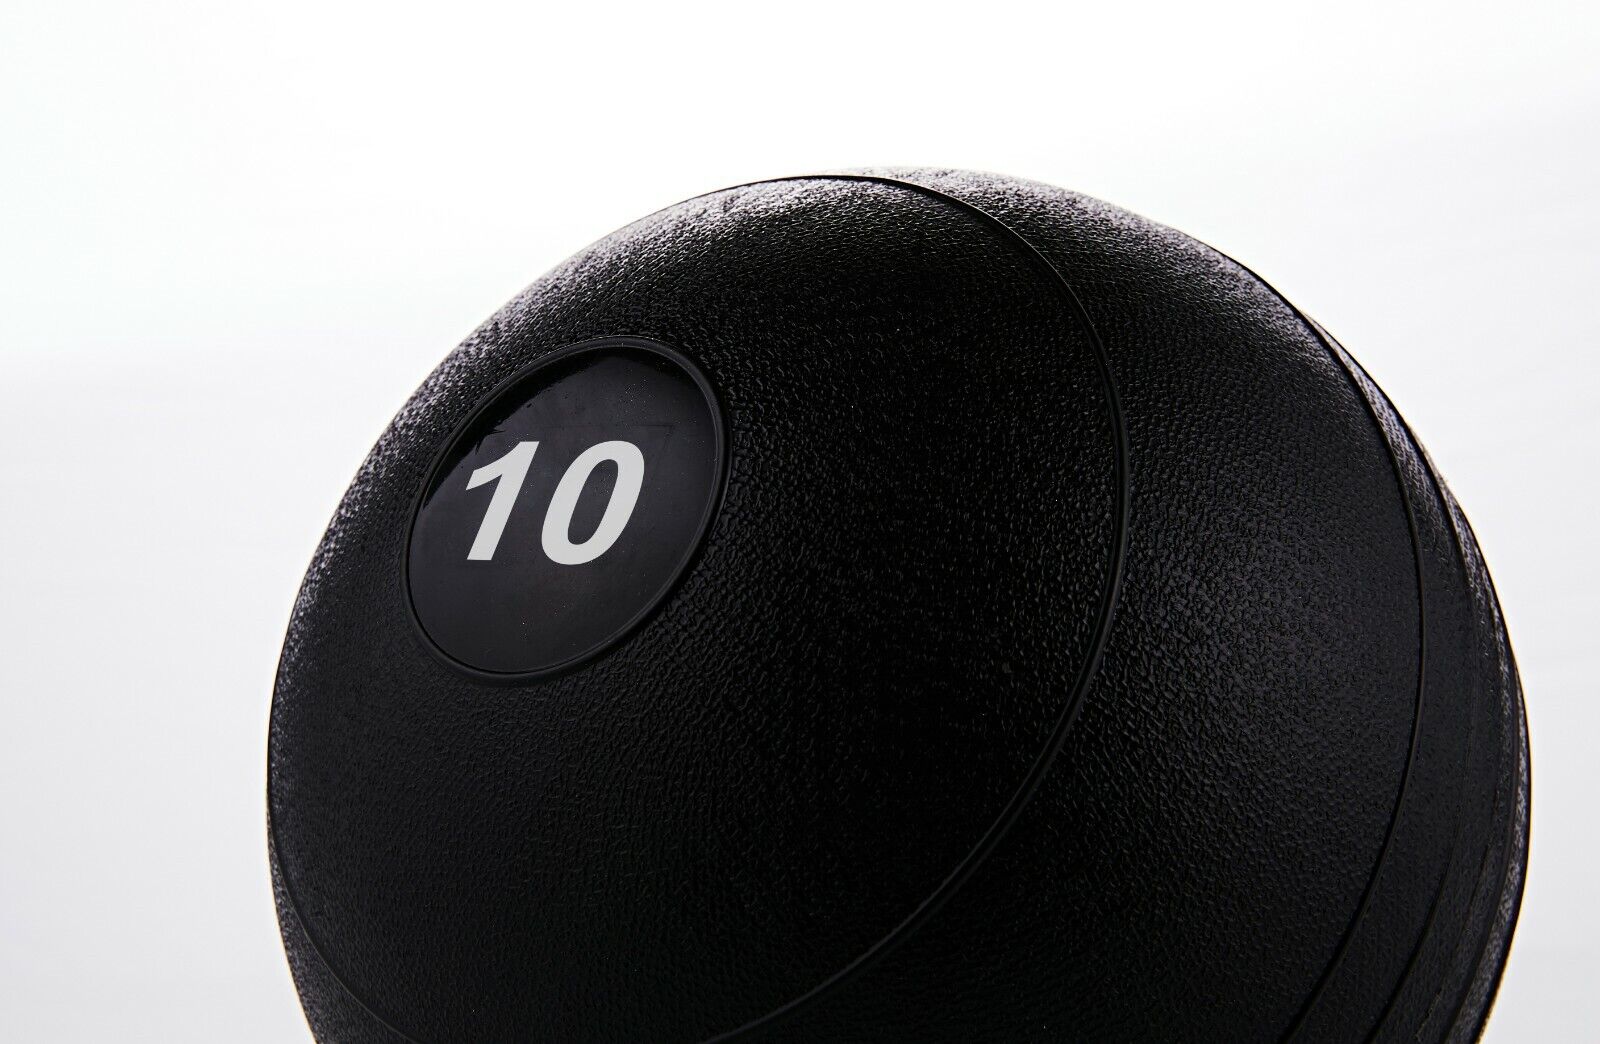 Vitos Fitness Exercise Slam Medicine Ball 10 to 70 lb Durable Weighted Gym 